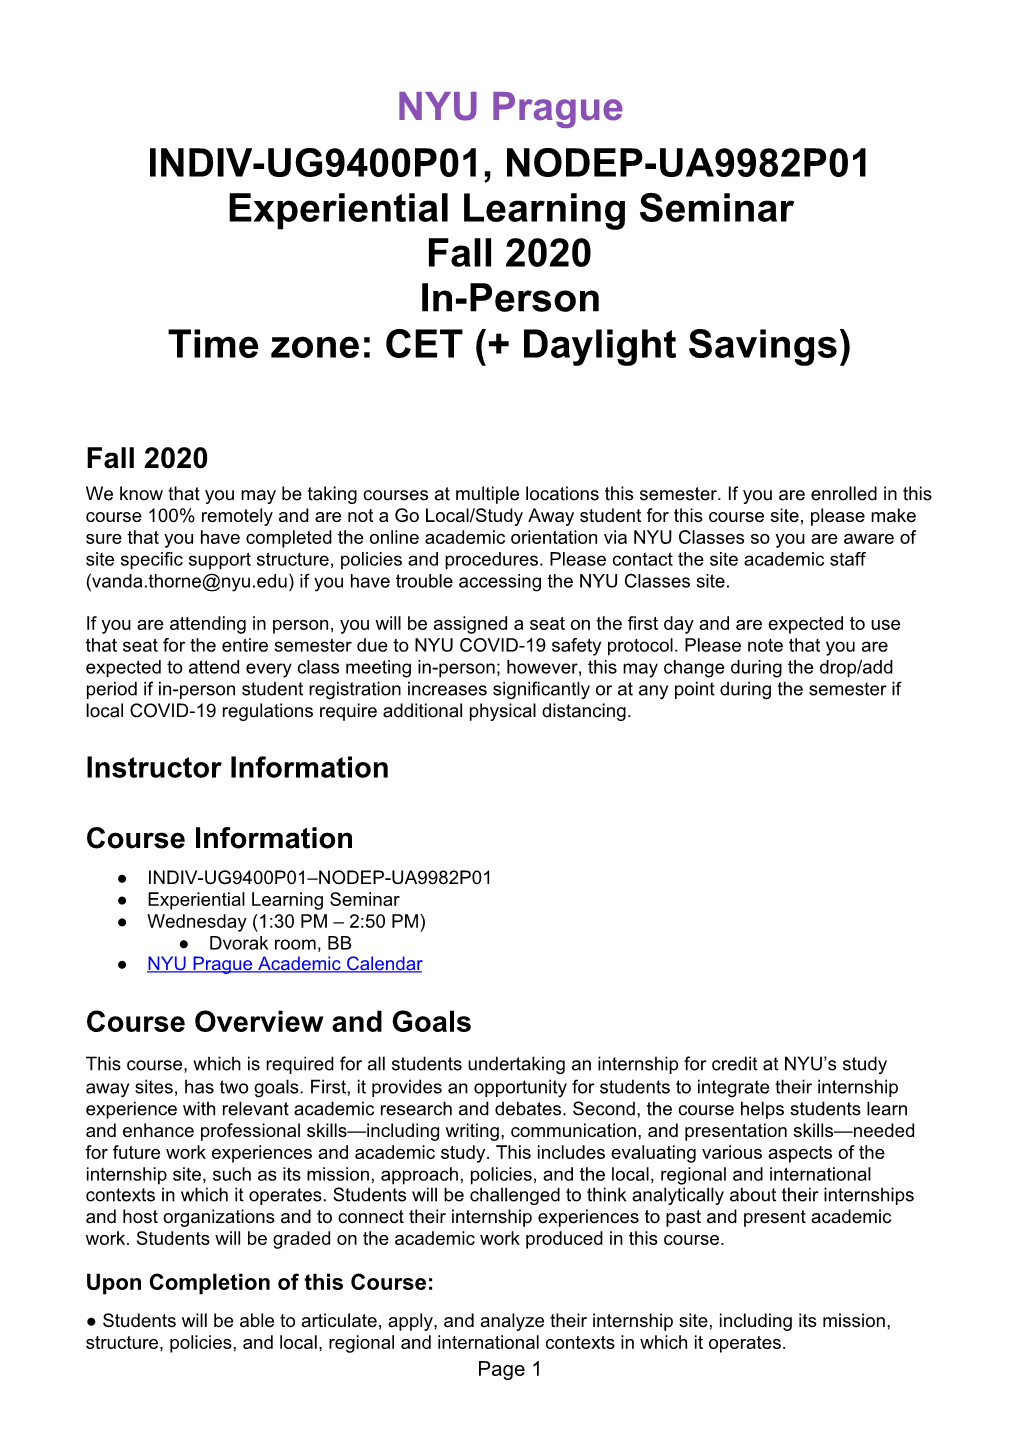 Experiential Learning Seminar Fall 2020 In-Person Time Zone: CET (+ Daylight Savings)